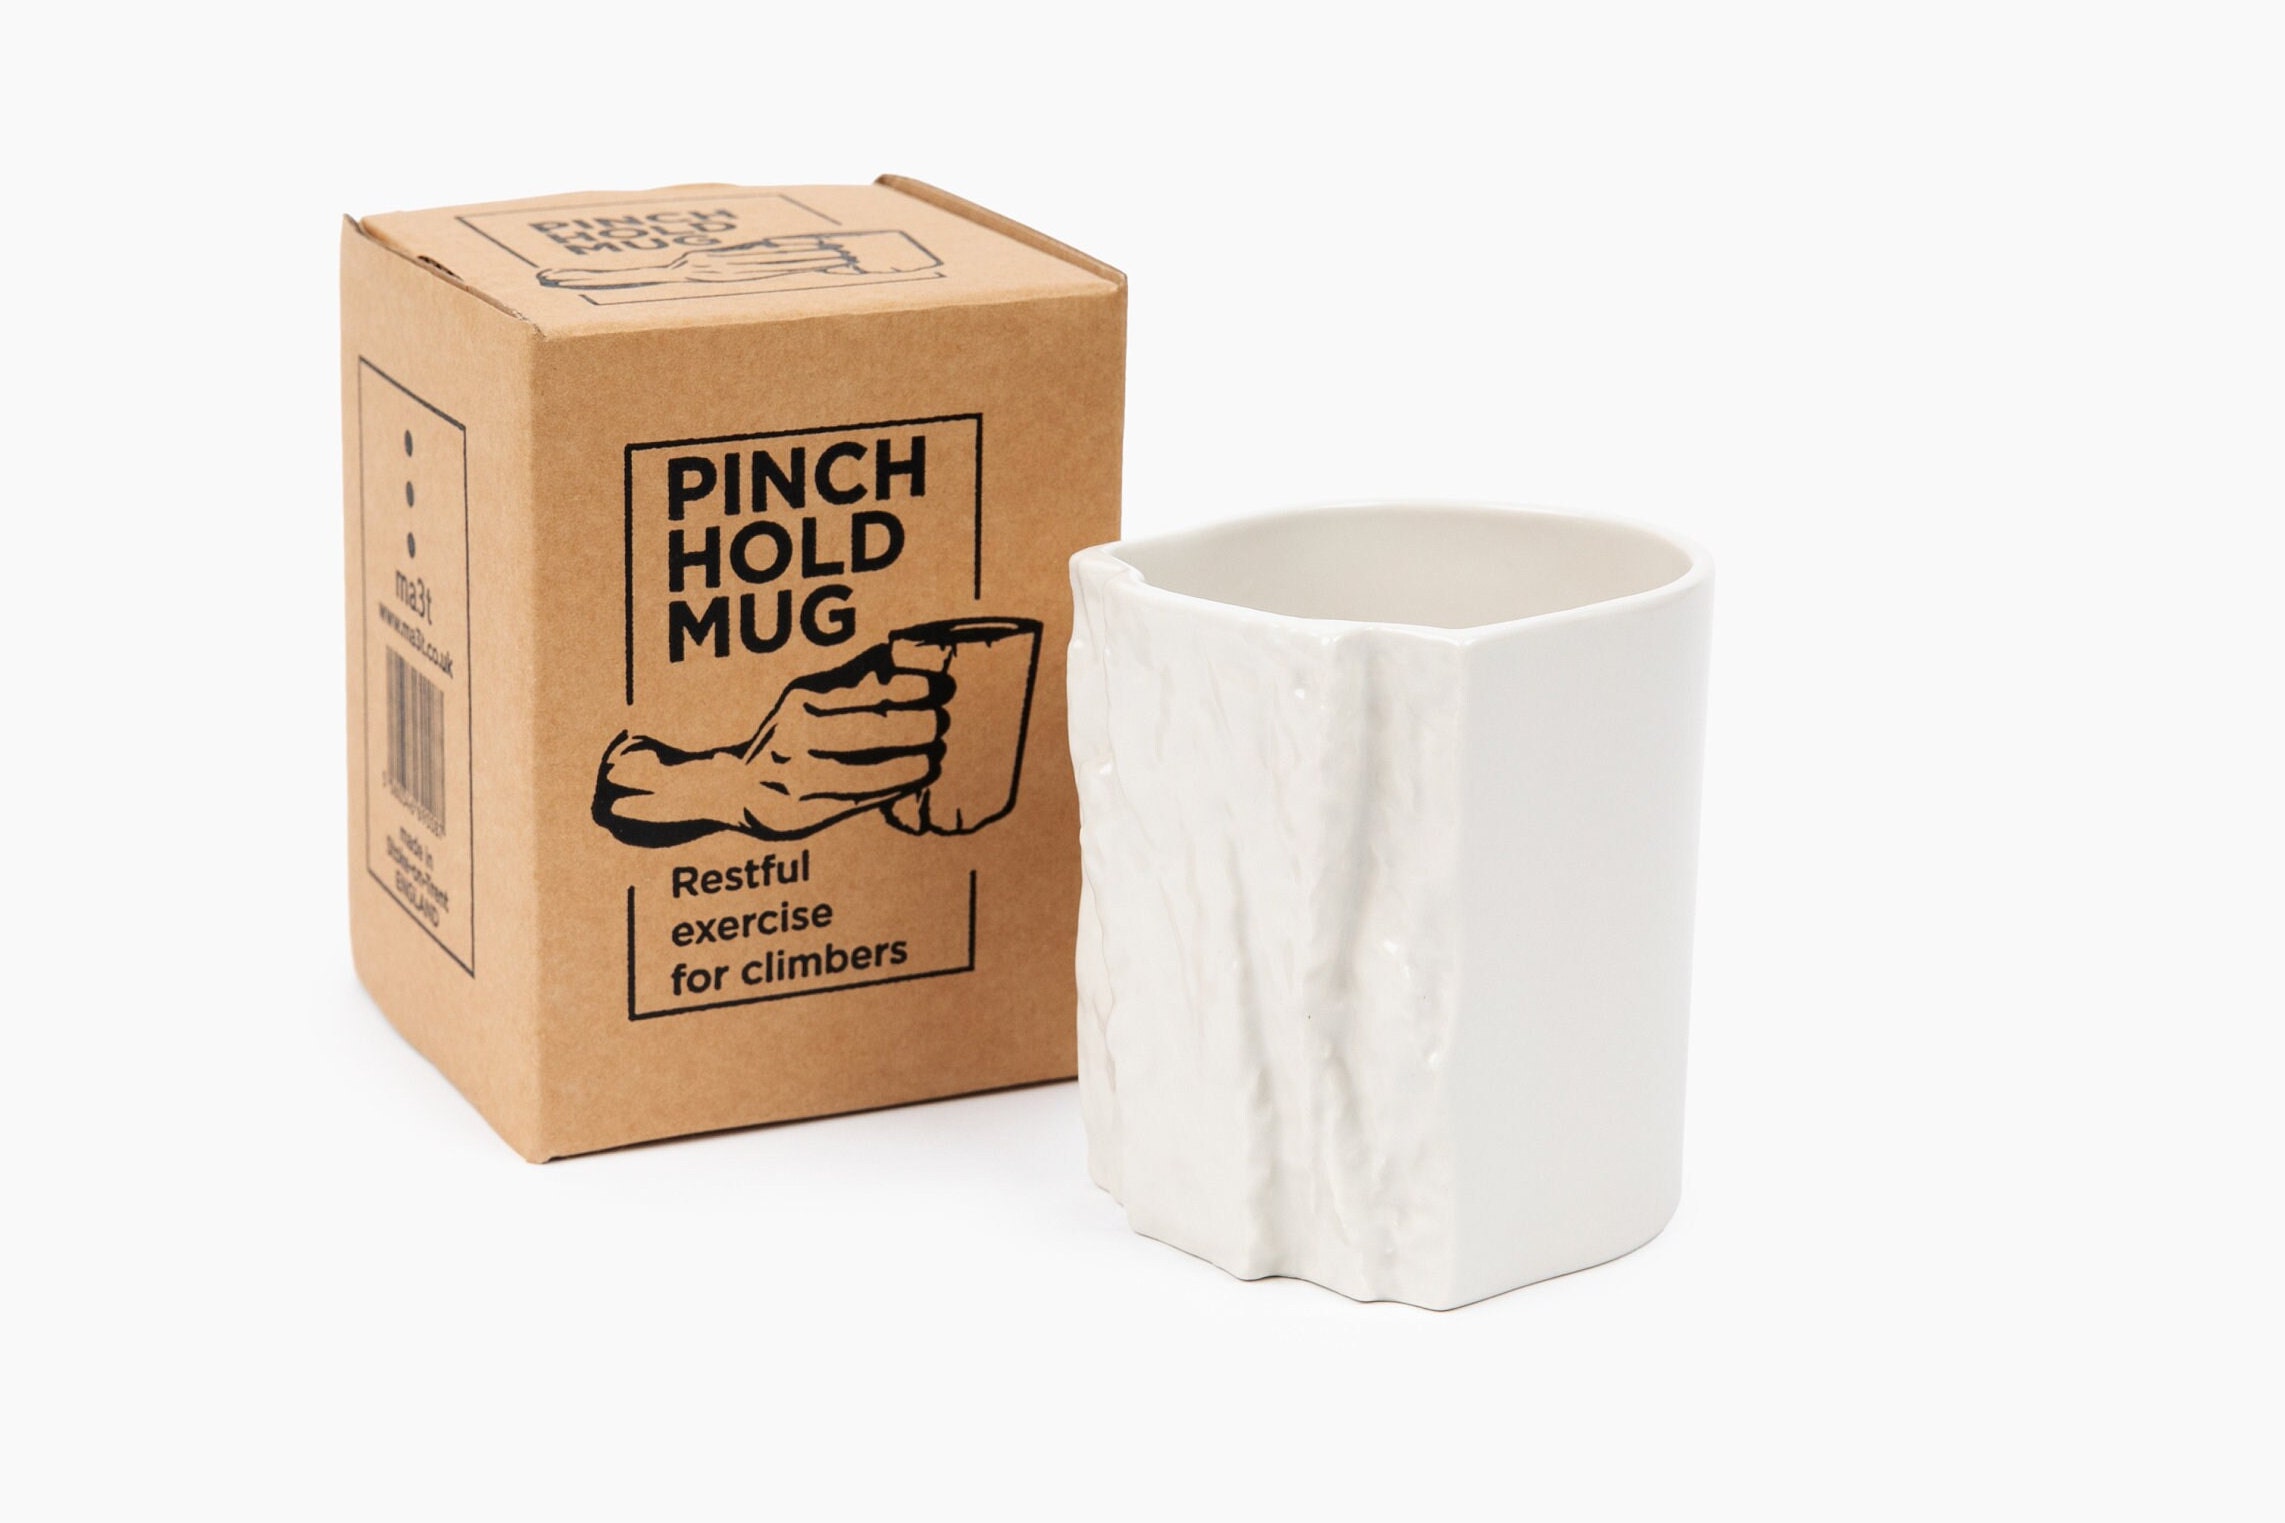 3-D] ROCK CLIMBING HOLD / GRIP ATTACHED TO CUP, Ceramic Coffee Cup / Mug,  VINT.